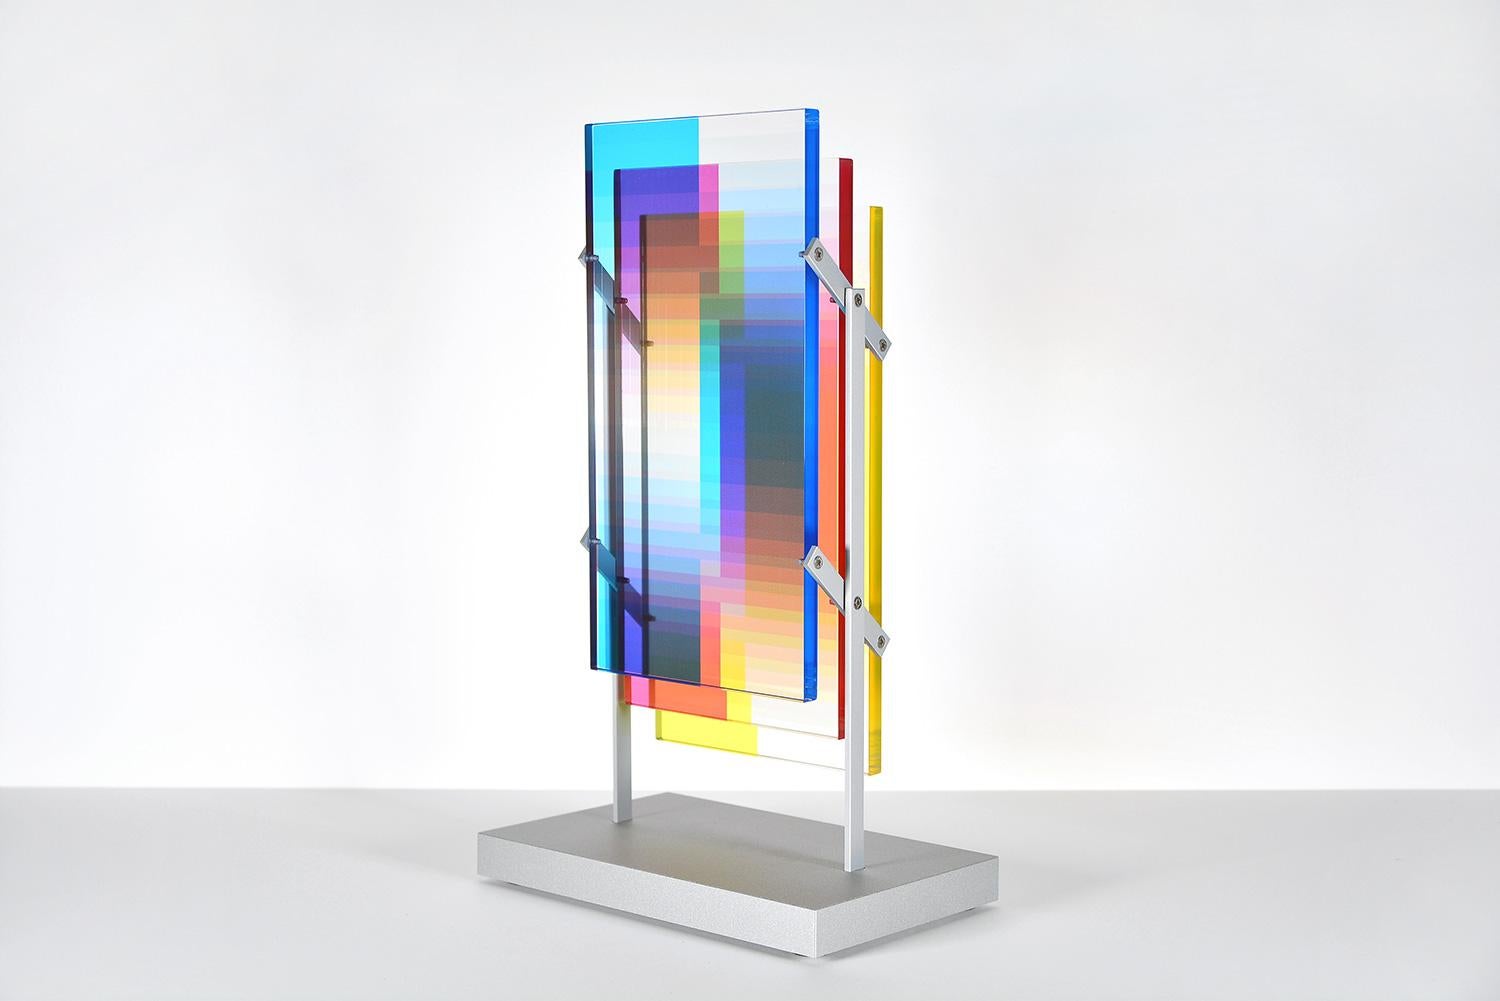 Felipe Pantone SUBTRACTIVE VARIABILITY MANIPULABLE IV
Date of creation: 2020
Medium: Acrylic and aluminium
Edition number: 40/50
Size: 33 x 13 x 21 cm
Condition: New, in mint conditions
Sculpture made of acrylic and aluminium part of a limited